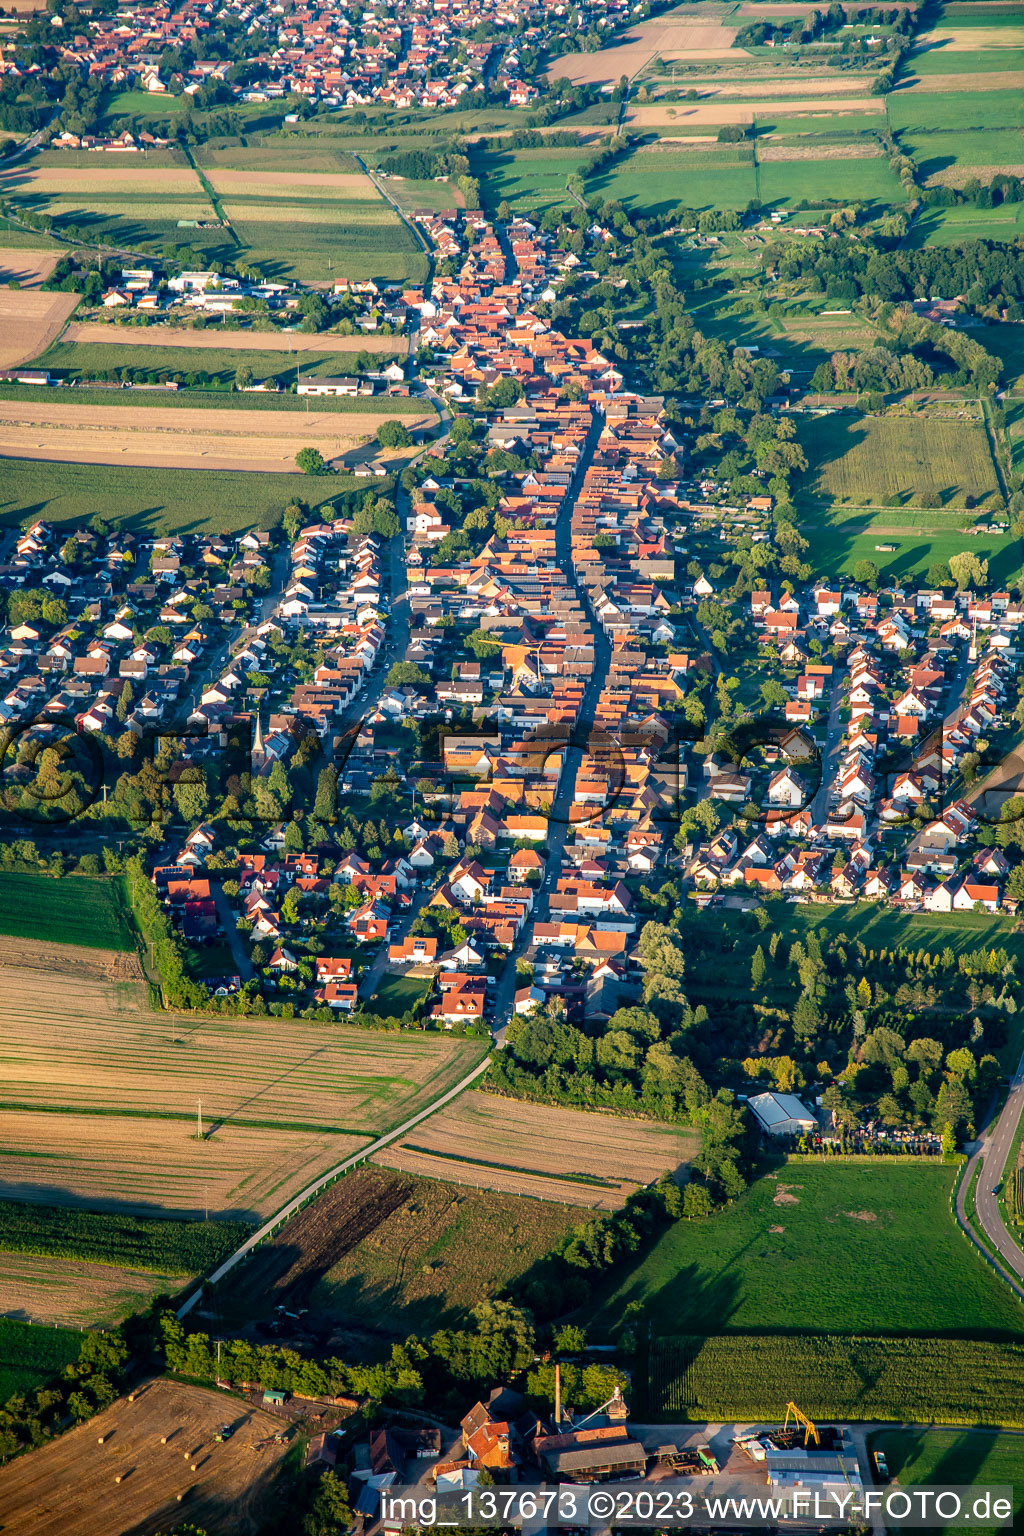 From the west in Freckenfeld in the state Rhineland-Palatinate, Germany